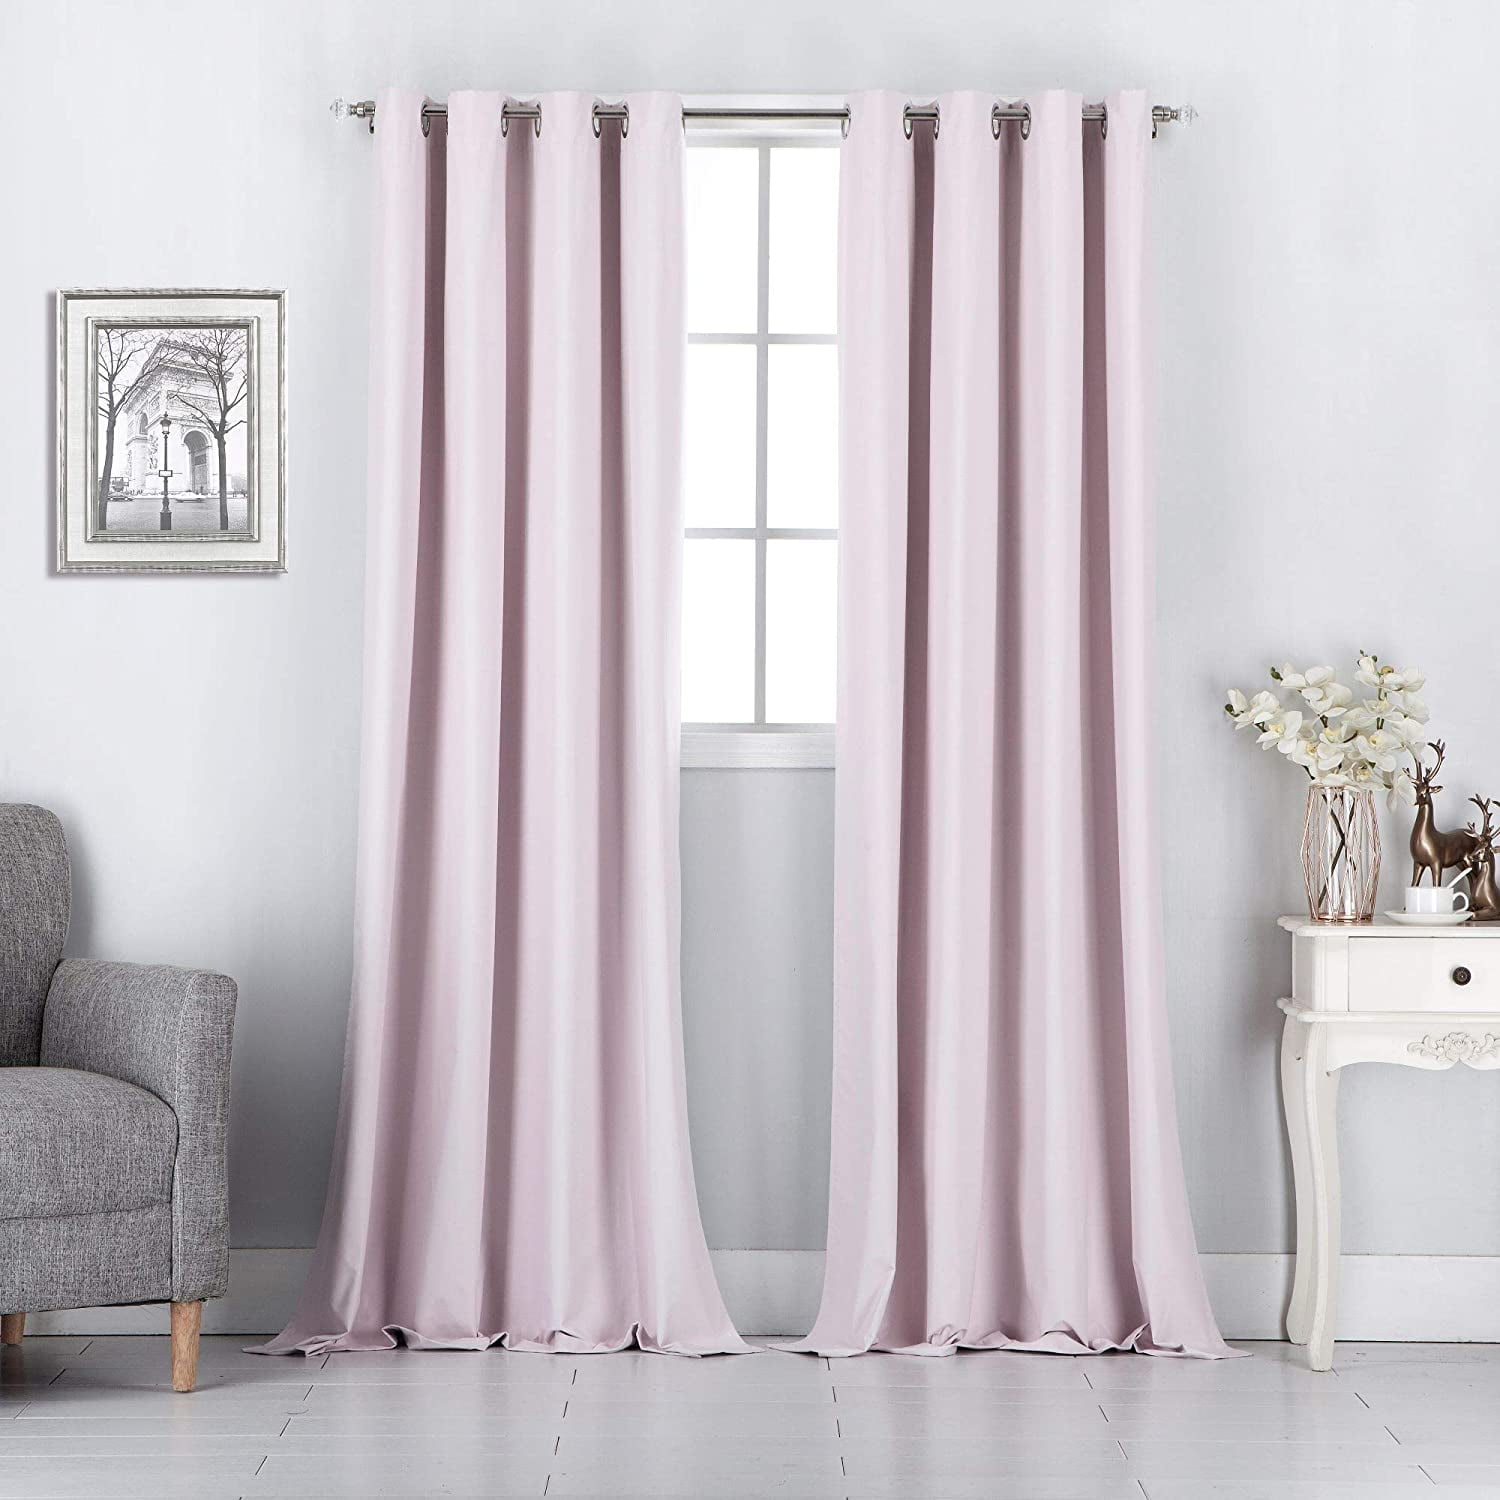 Curtainking 100% Blackout Curtains 84 in Grey Damask Medallion Window  Curtains for Bedroom Grommet Thermal Insulated Drapes for Living Room  Vintage